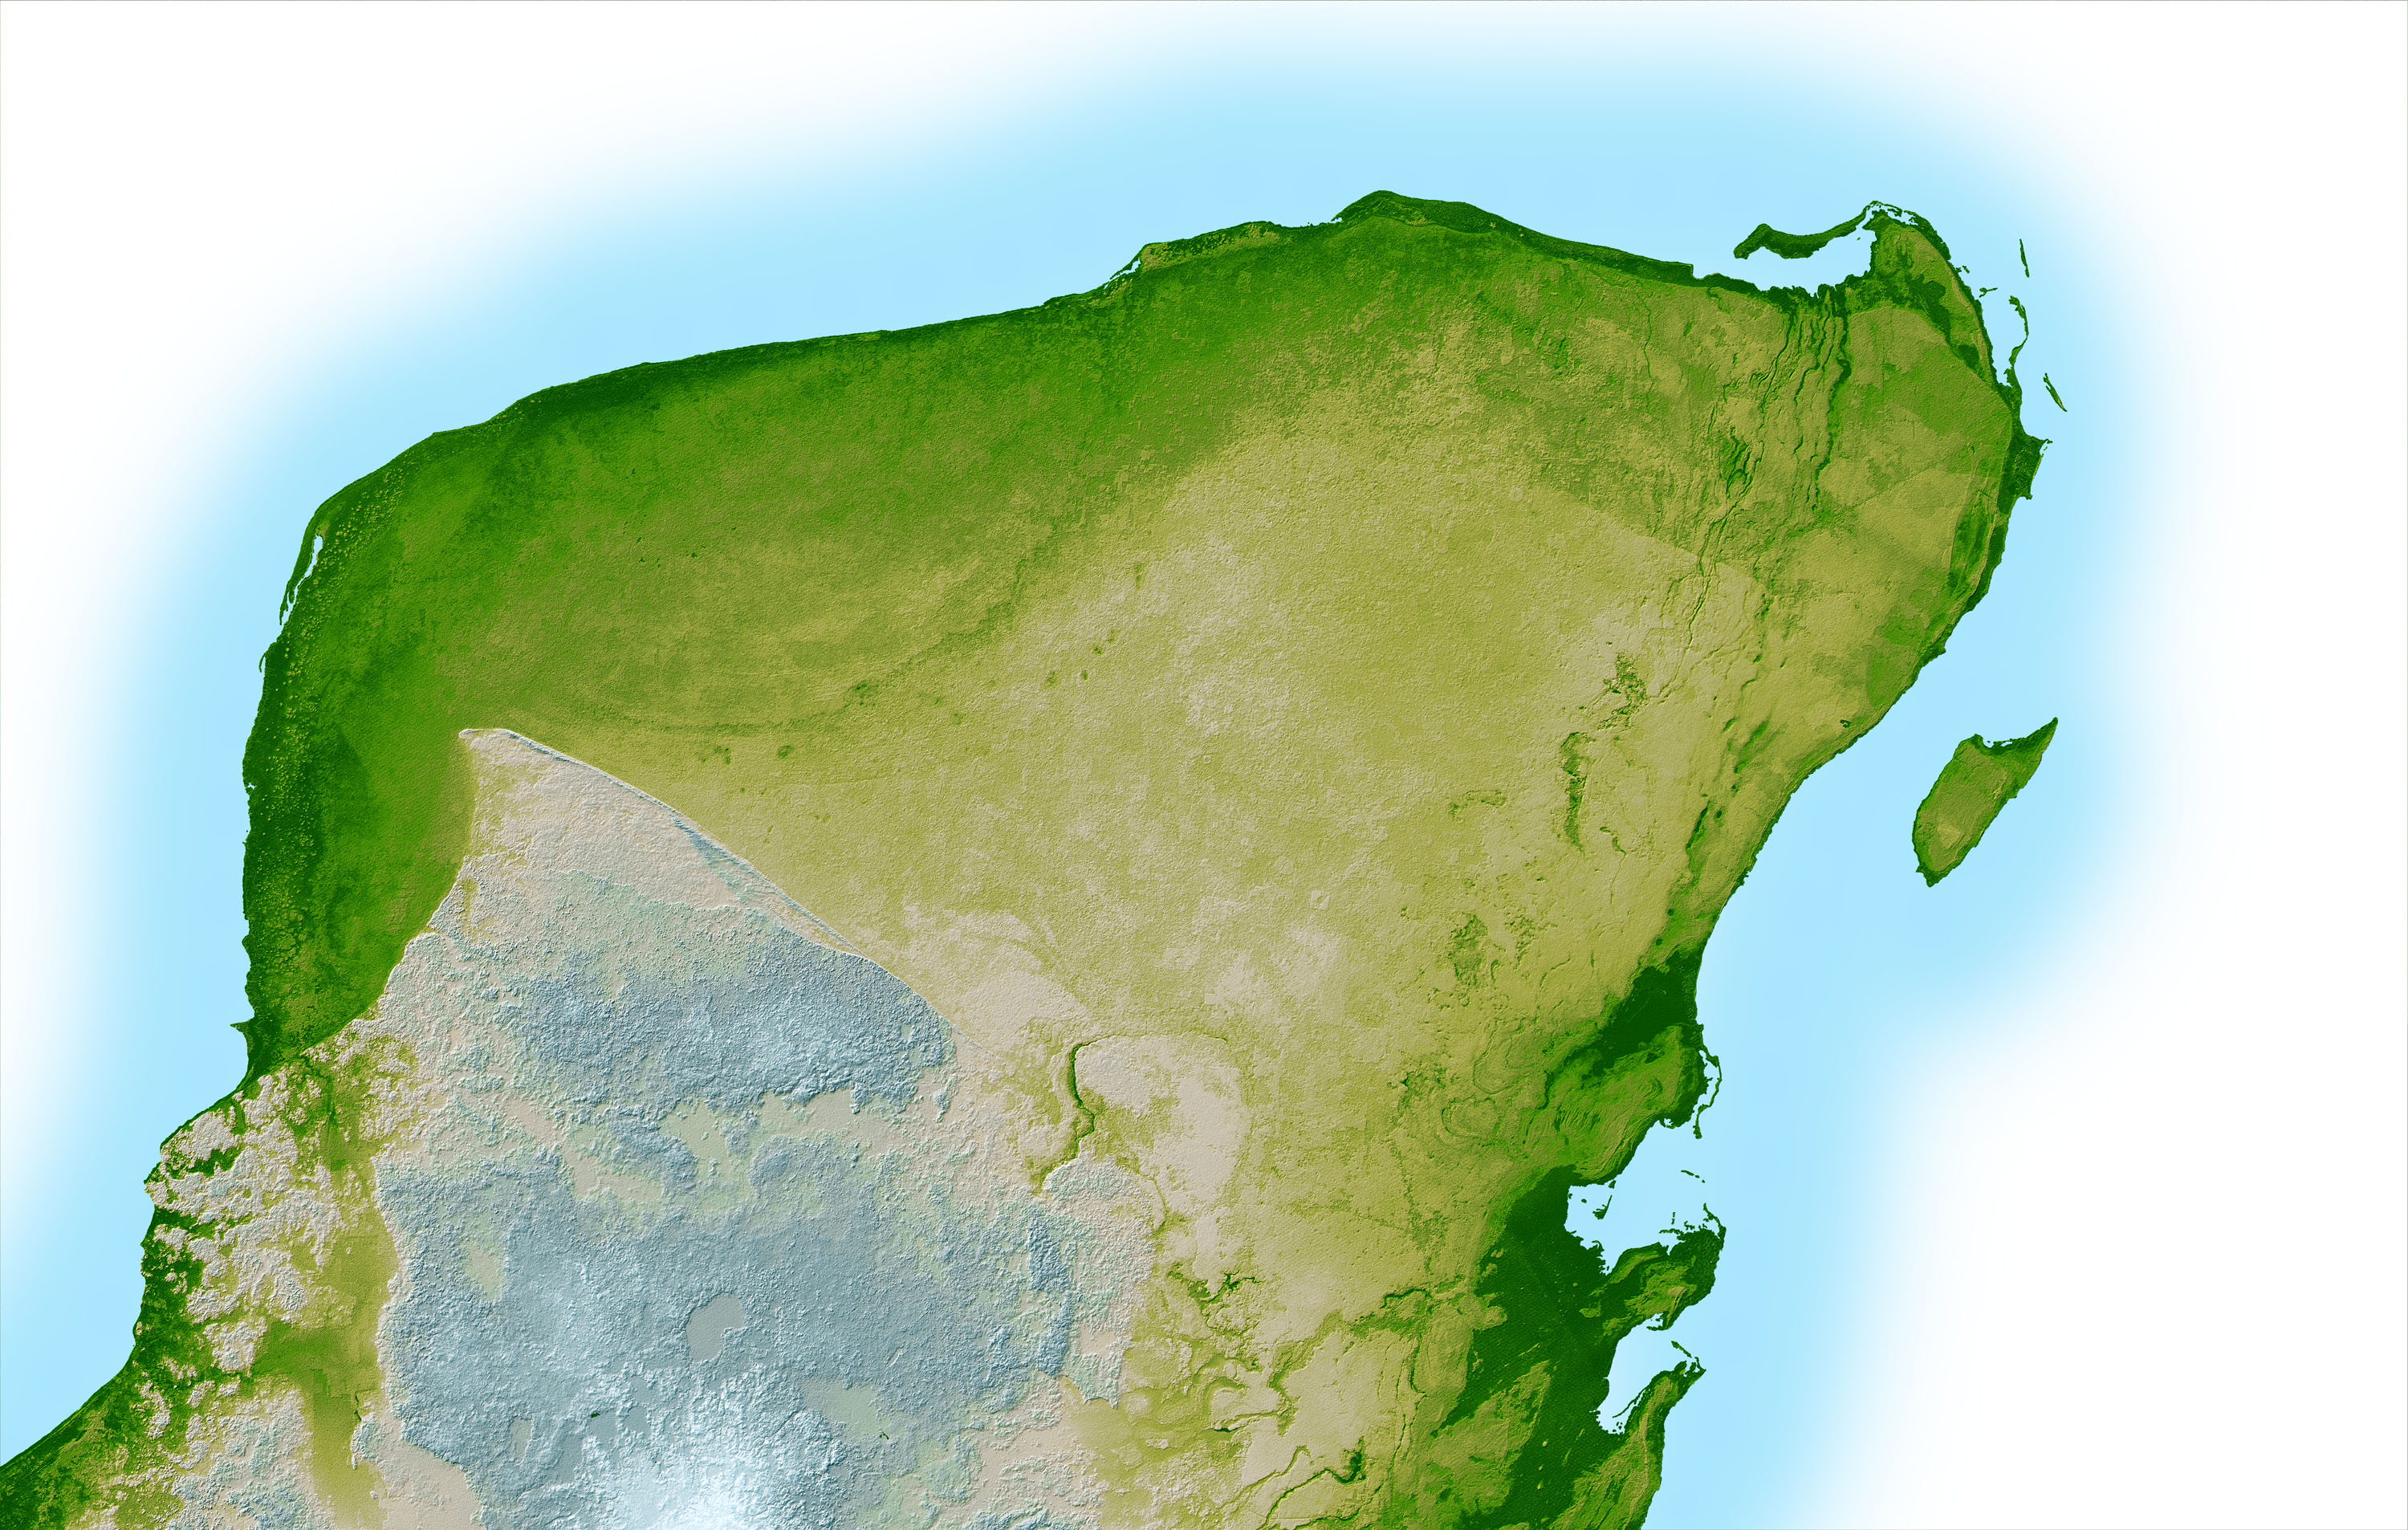 A high resolution topographic map of the Yucatan Peninsula created with data collected in the Shuttle Radar Topography Mission and released in 2003. In the upper left portion of the peninsula, a faint arc of dark green is visible indicating the remnants of the Chicxulub impact crater.